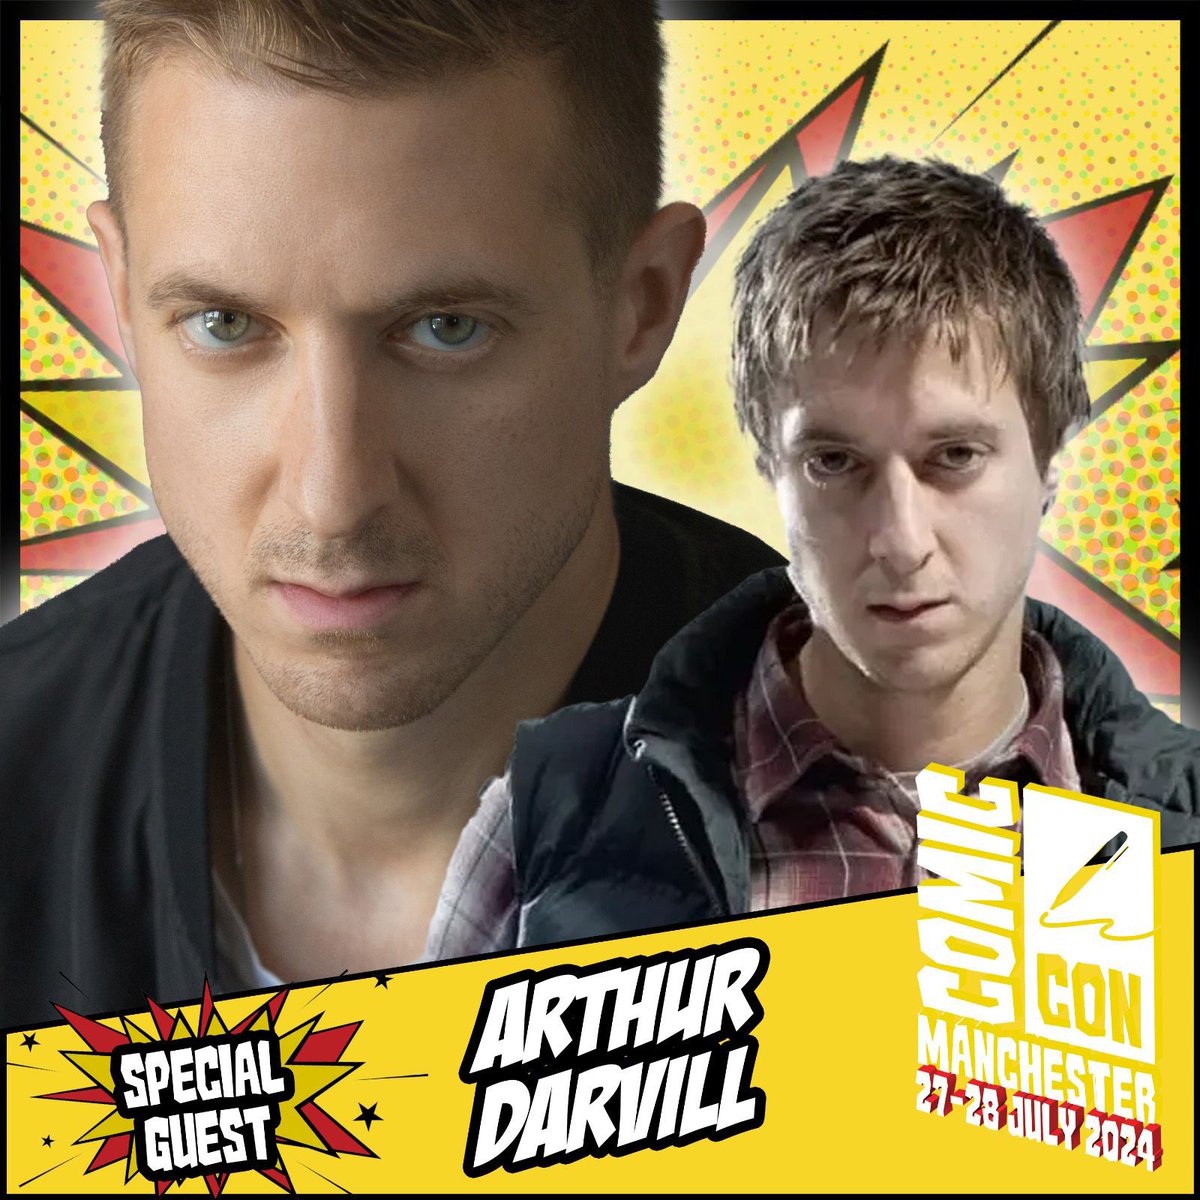 Comic Con Manchester welcomes Arthur Darvill, known for projects such as Doctor Who, Legends of Tomorrow, Broadchurch, and many more. Appearing 27-28 July! Tickets: comicconventionmanchester.co.uk